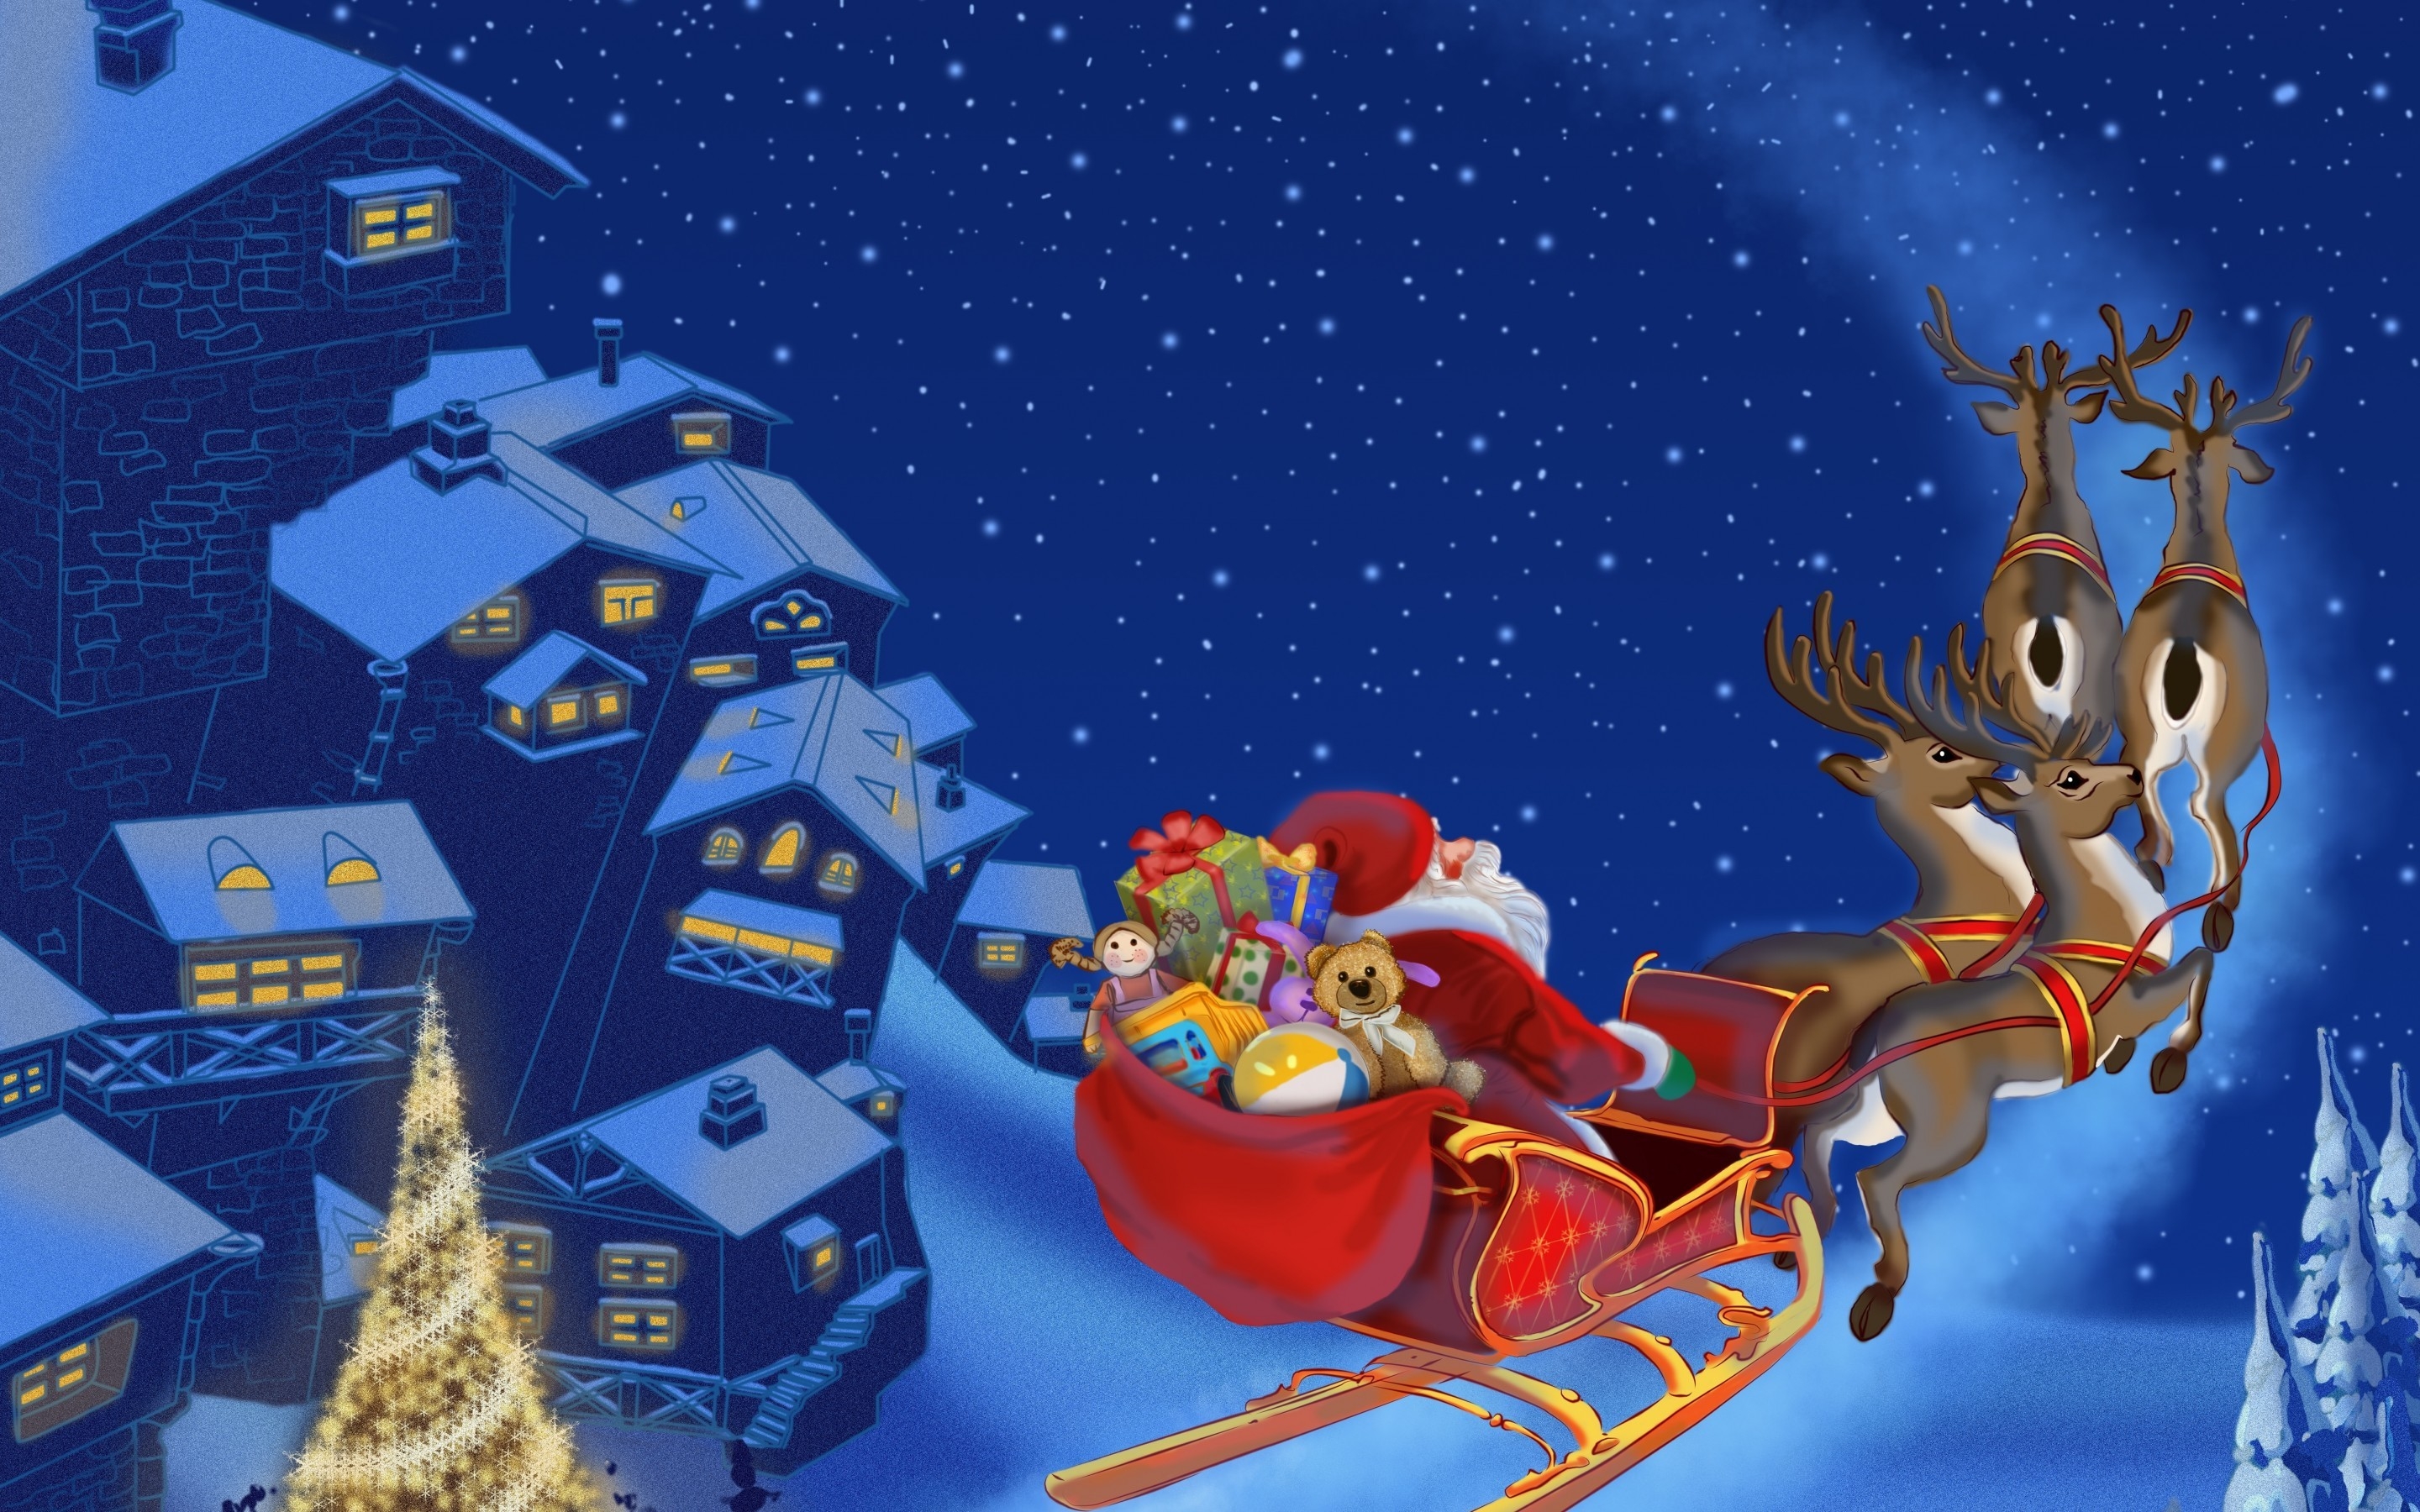 Santa Clause Flying for 2880 x 1800 Retina Display resolution